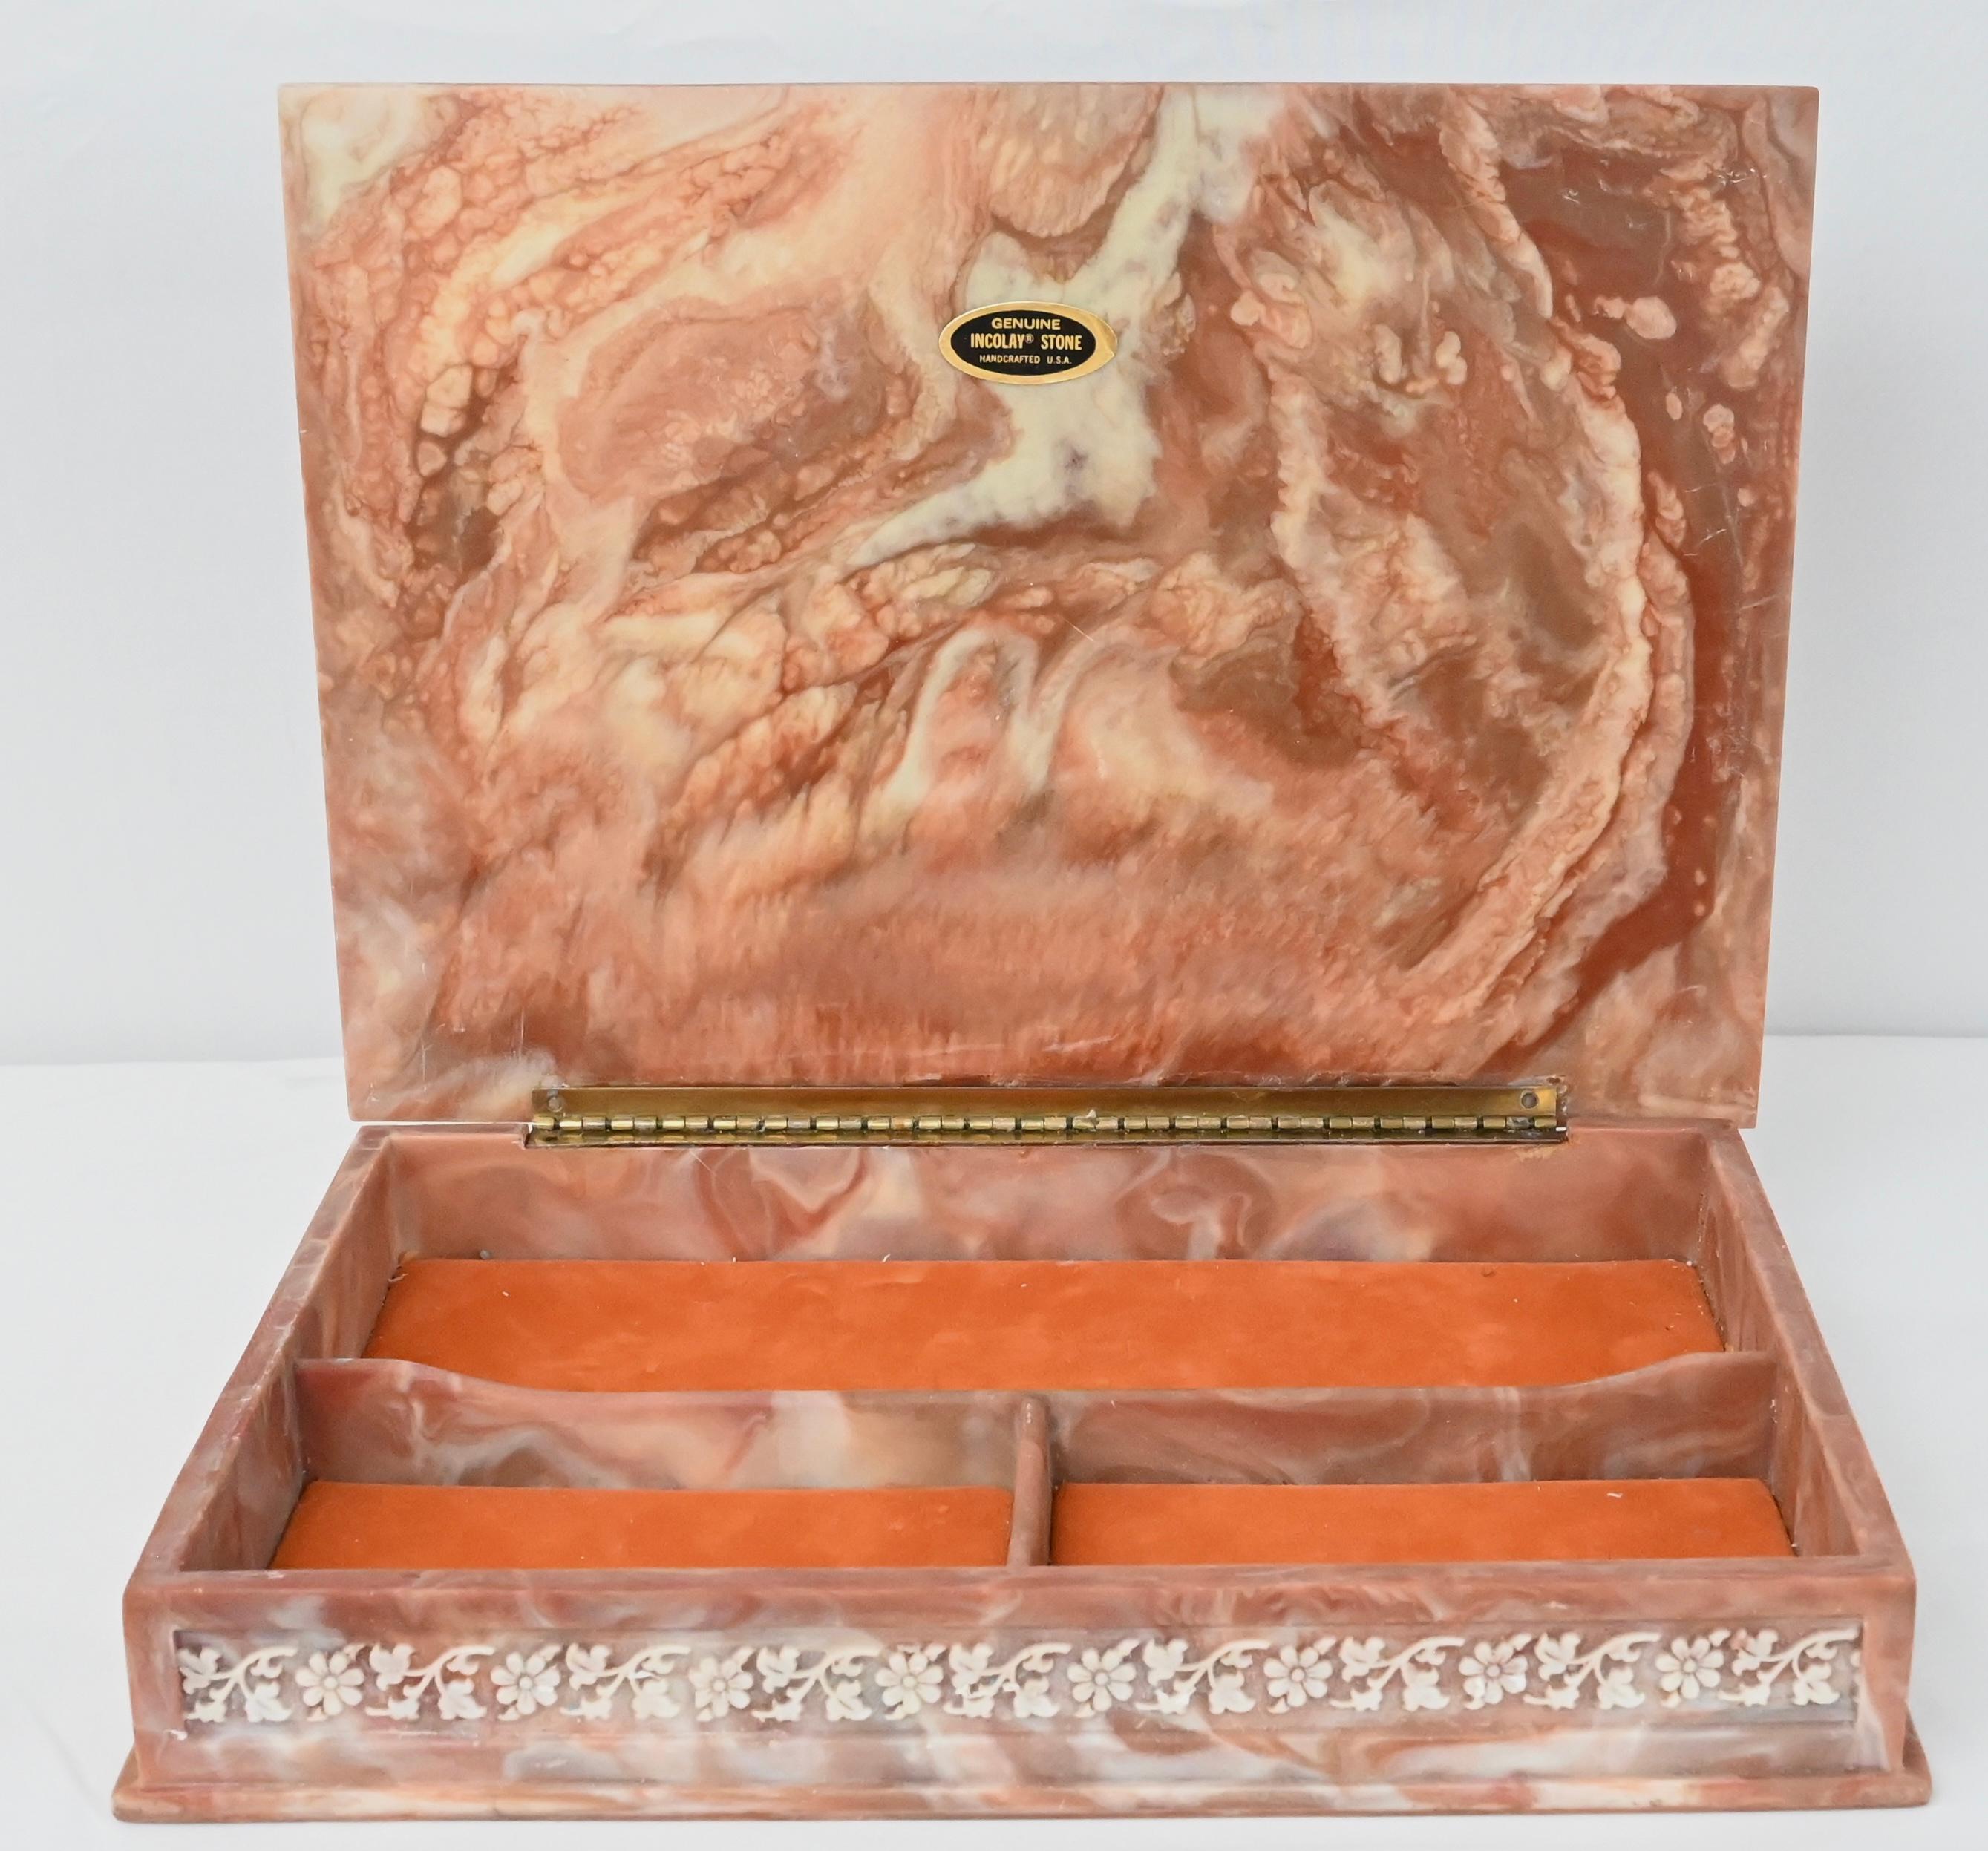 Large Incolay Stone Jewelry Box, handcrafted in the USA. 

This stunning American made Incolay Stone is a handcrafted man-made material using natural stone that resembles cameo. It became very popular in the 1970s and 1980s. The company was located